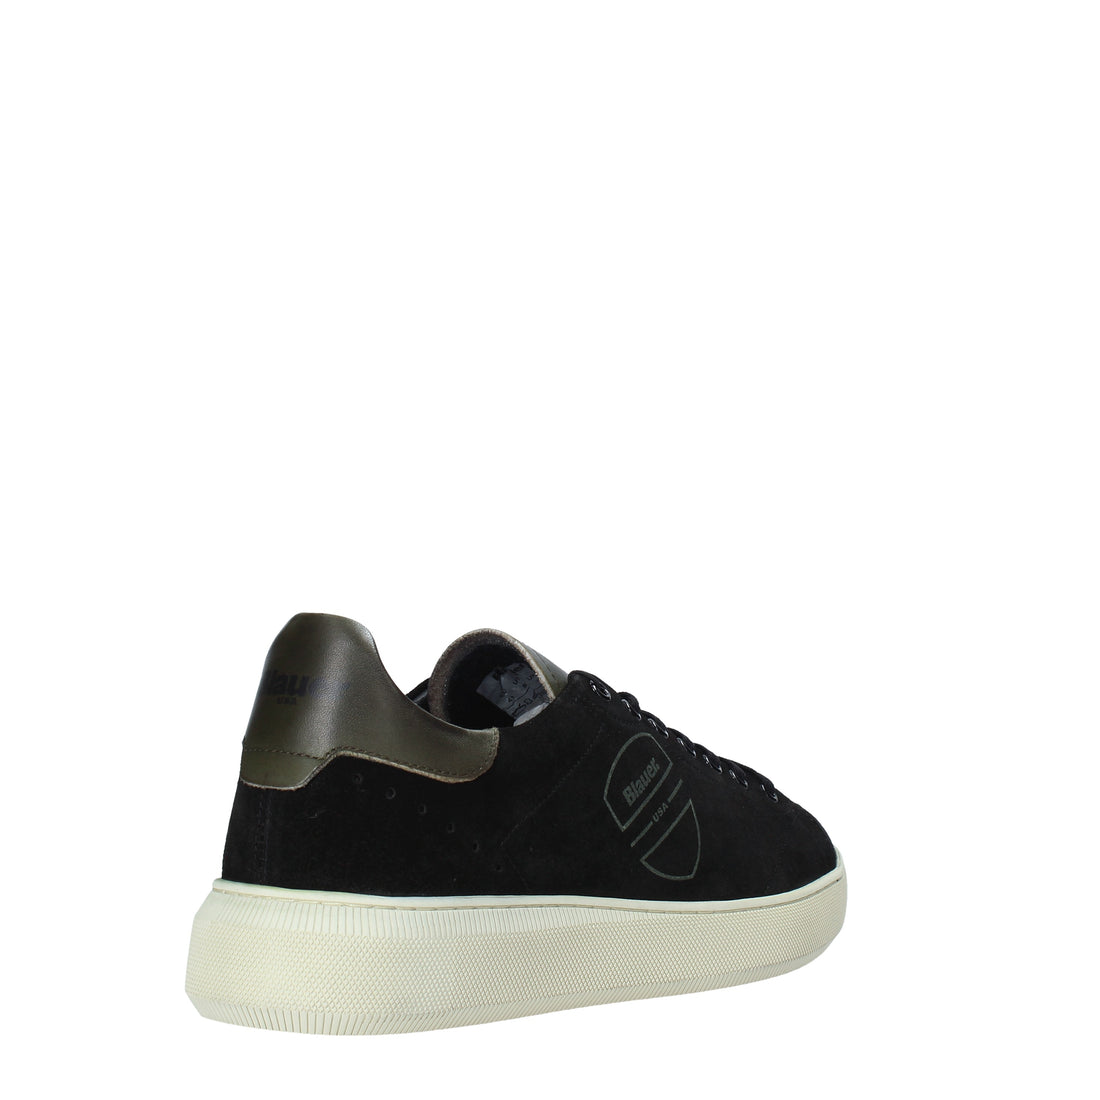 Sneakers Nero Blauer Shoes